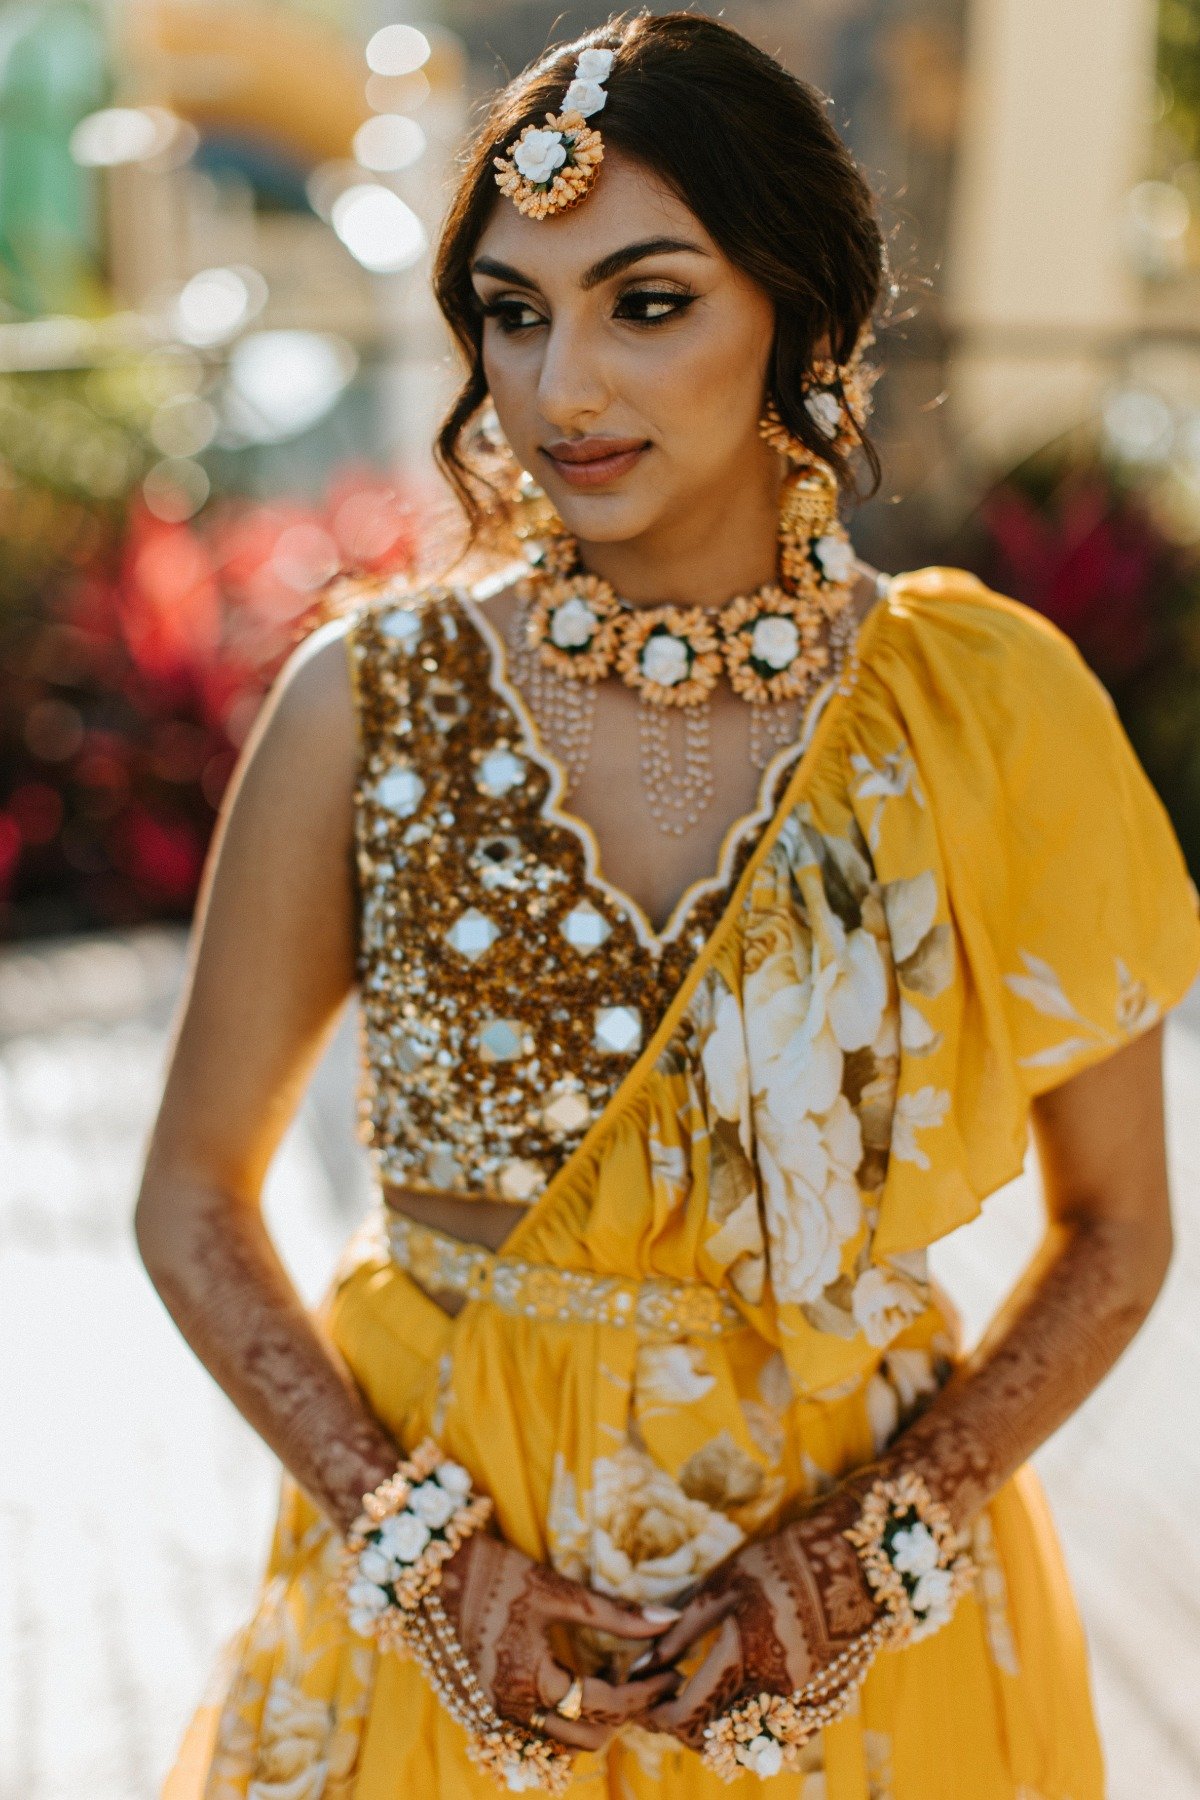 yellow and gold Indian wedding dress